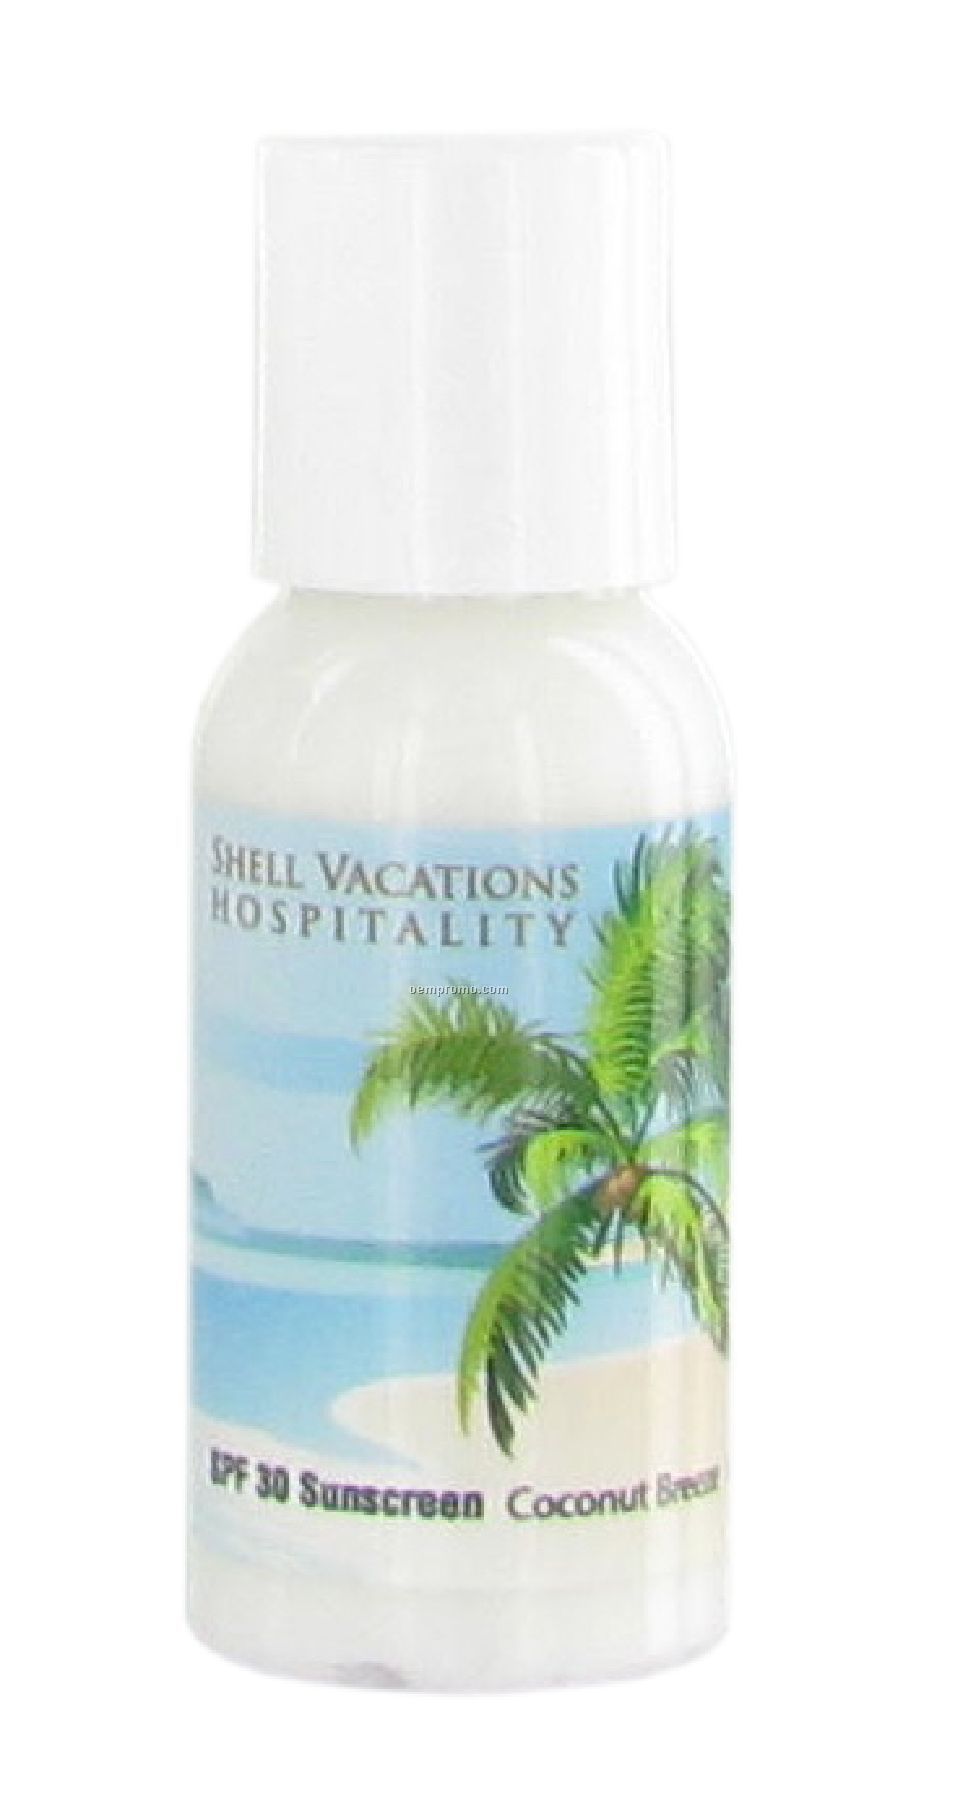 1 Oz. Spf 30 Sunscreen Lotion In Round Bottle